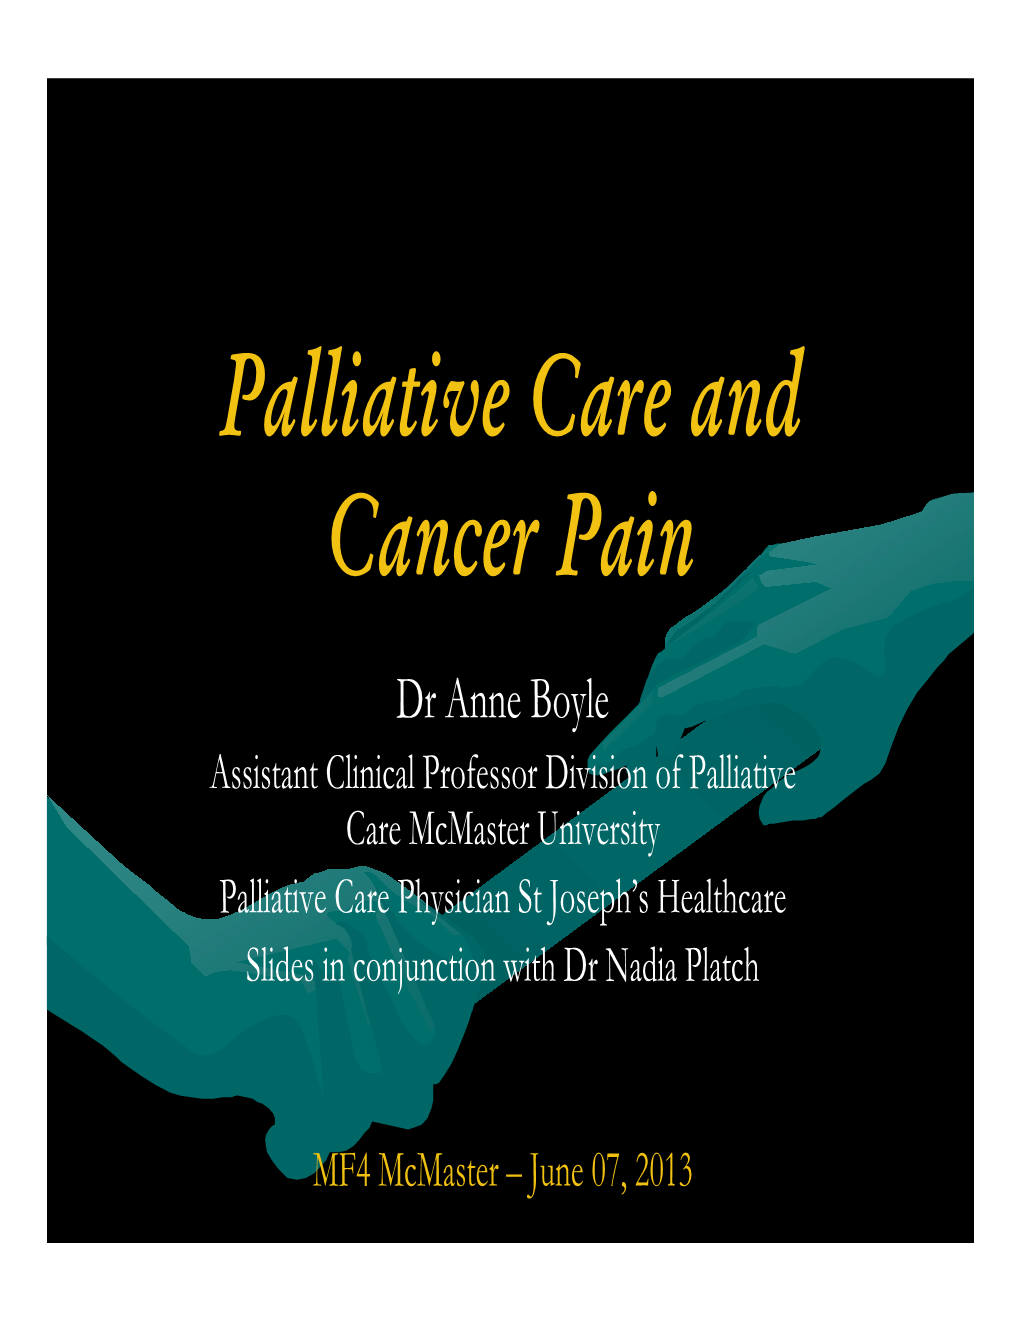 Palliative Care and Cancer Pain